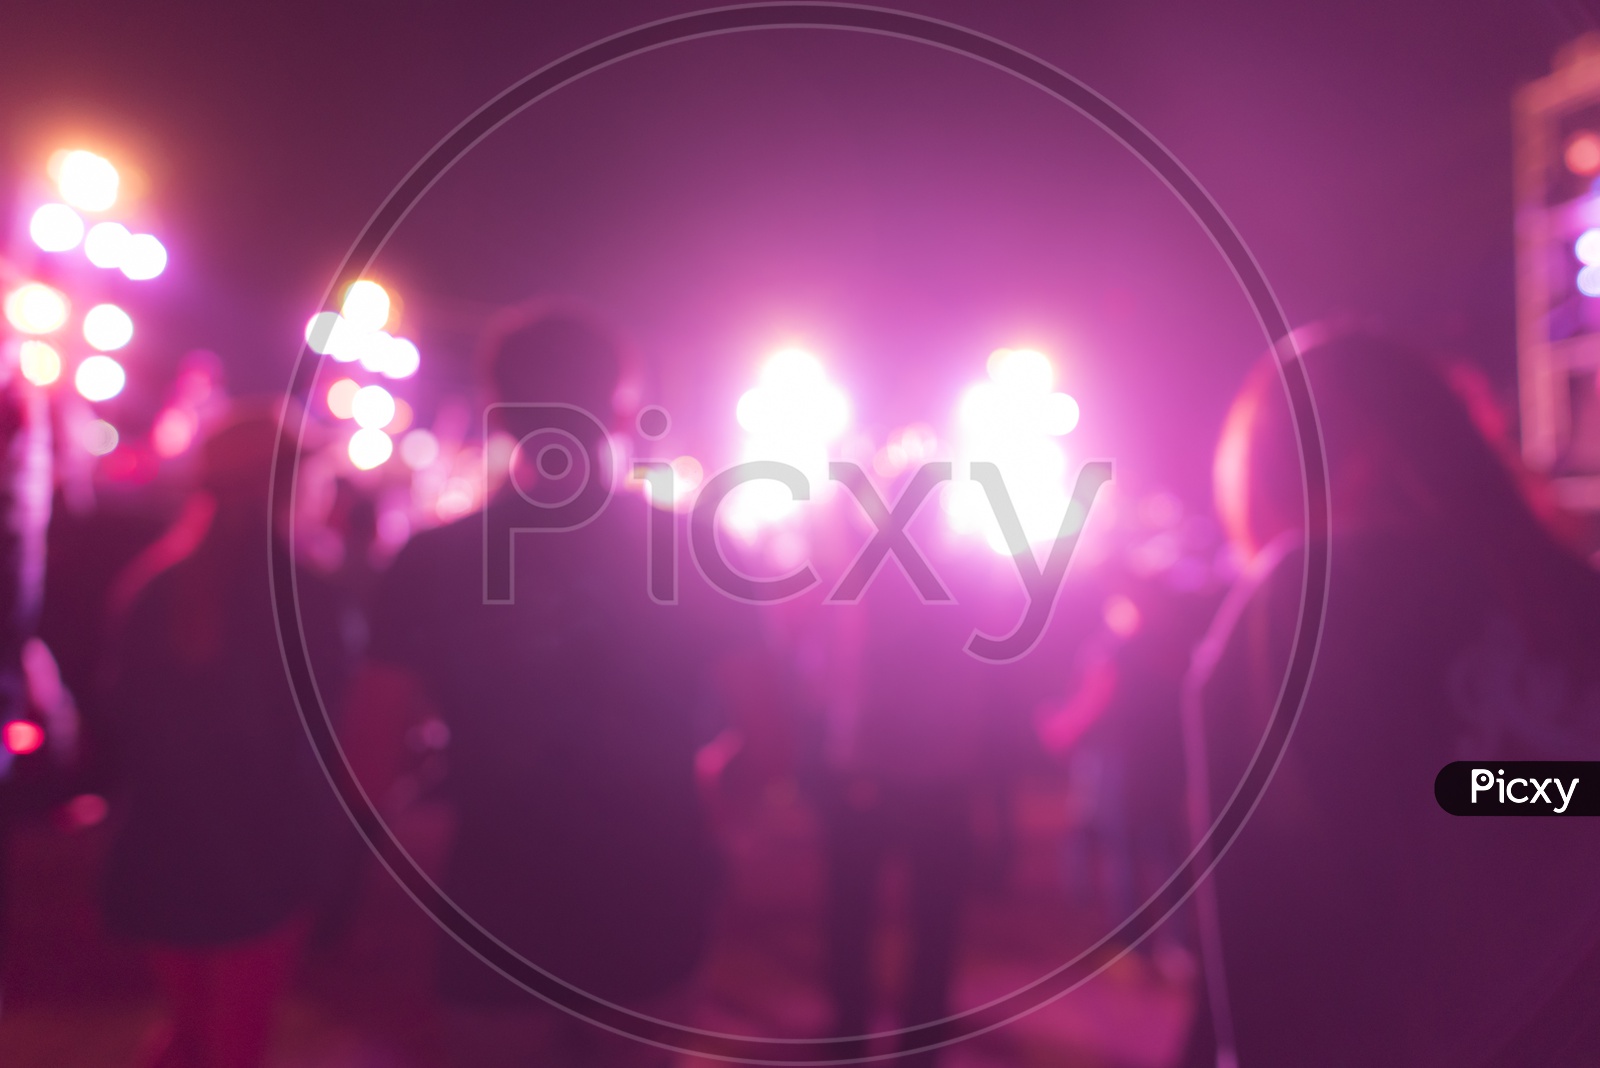 party in a pub, blurry image With Pink Colour Palate